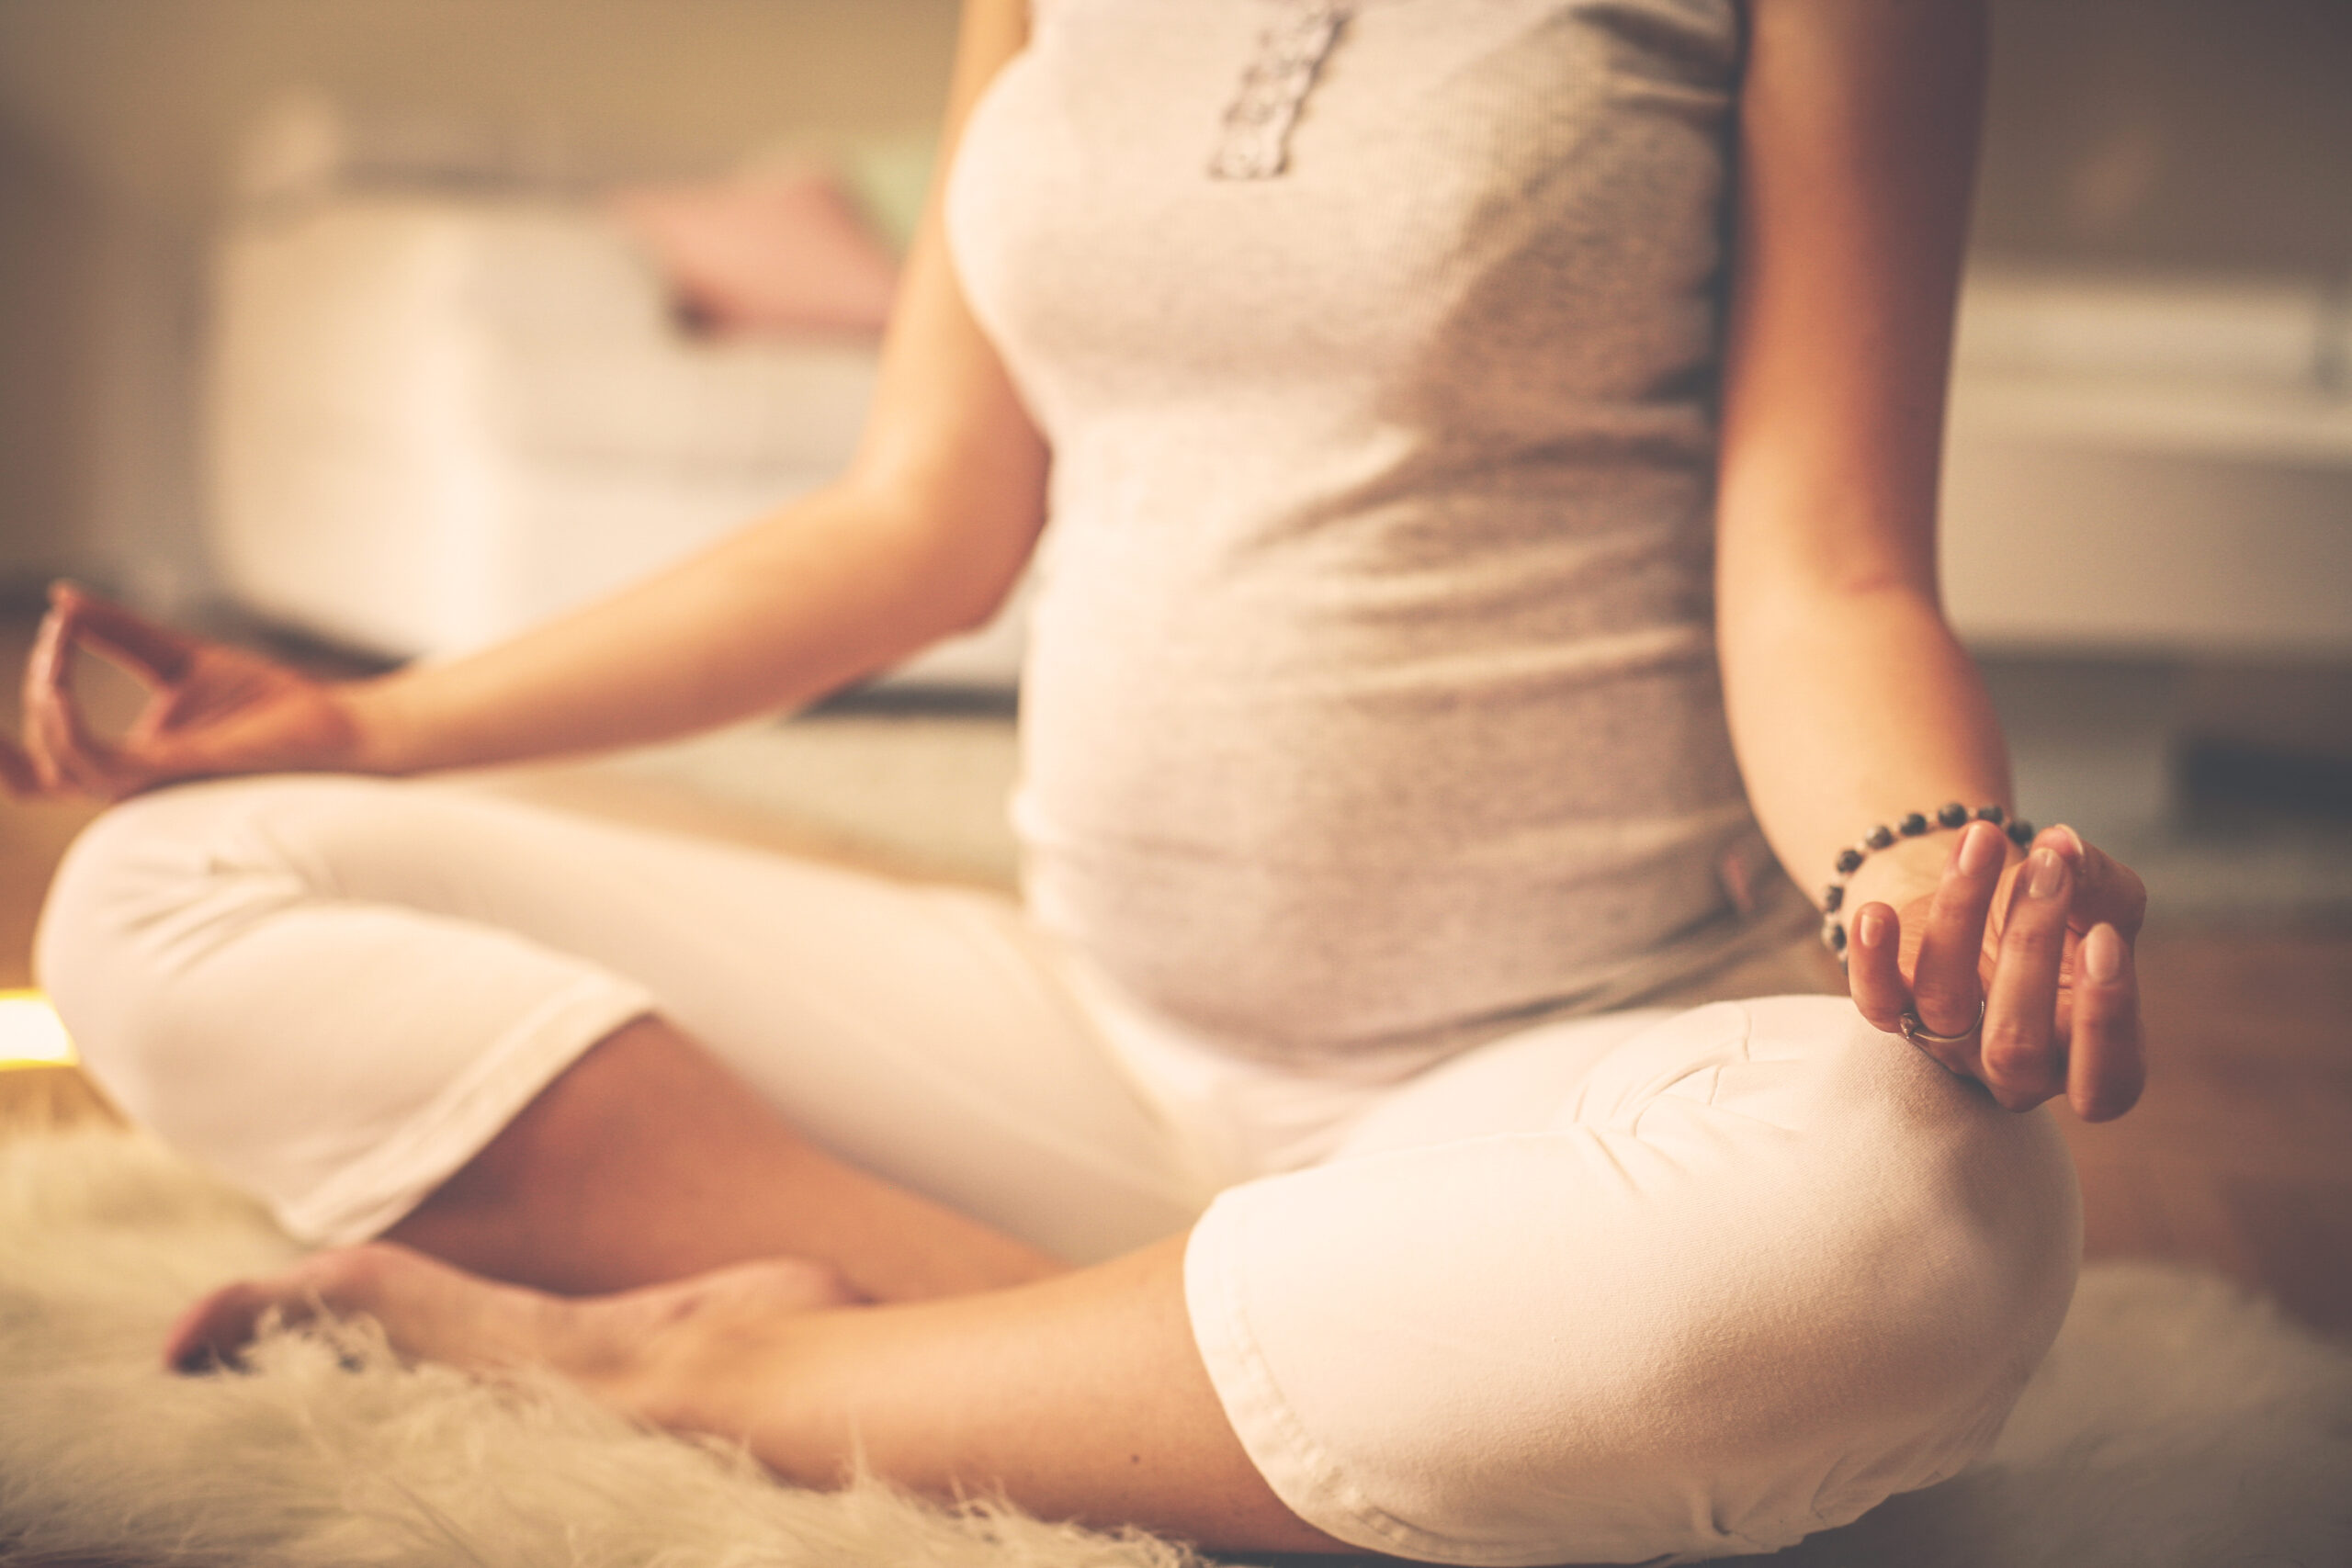 When you start hypnobirthing early it promotes a calm pregnancy and birth.